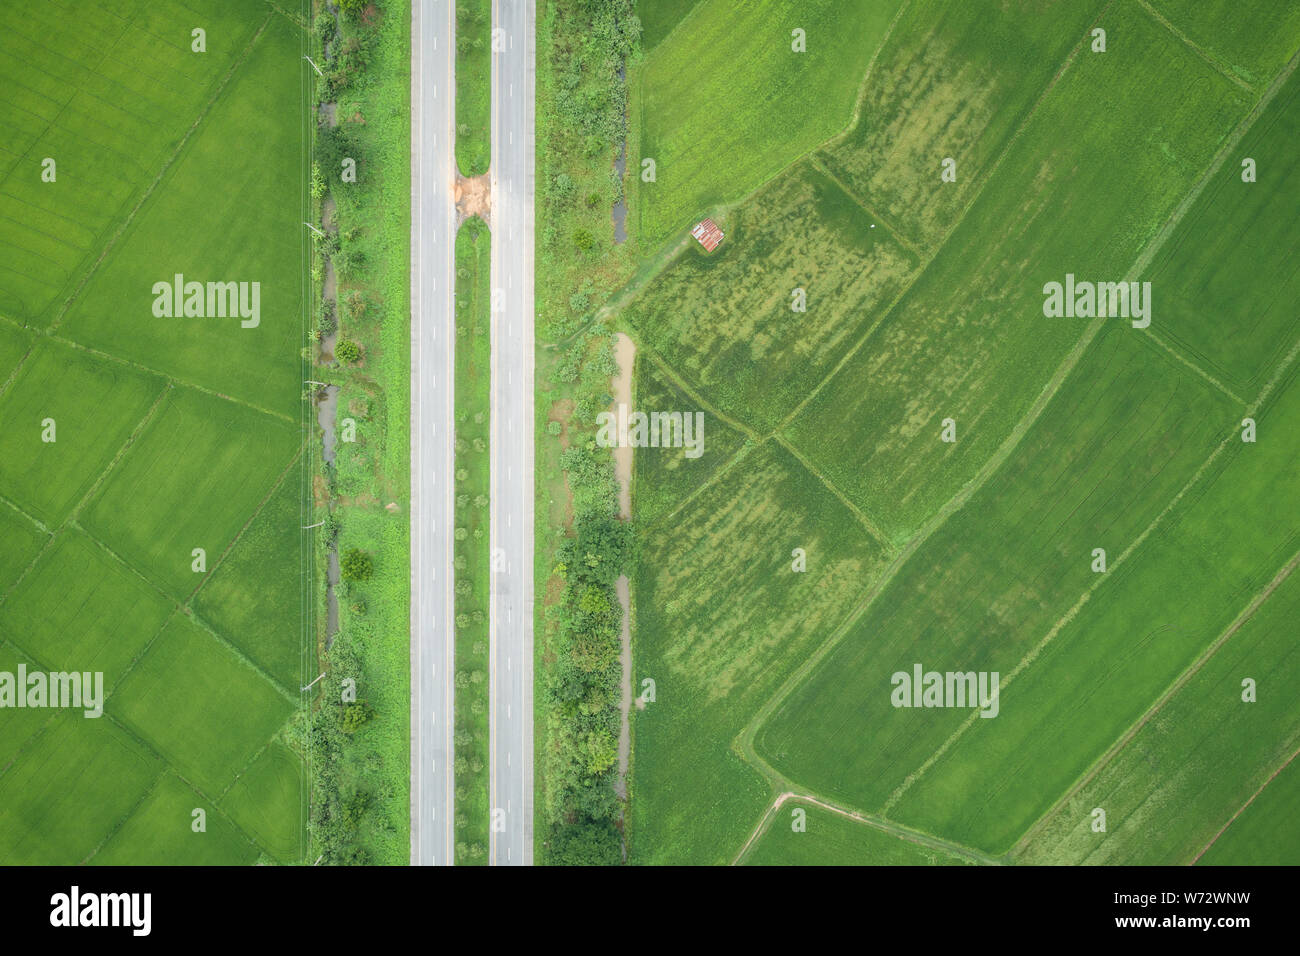 Top view asphalt road in the middle of green young rice fields Stock Photo